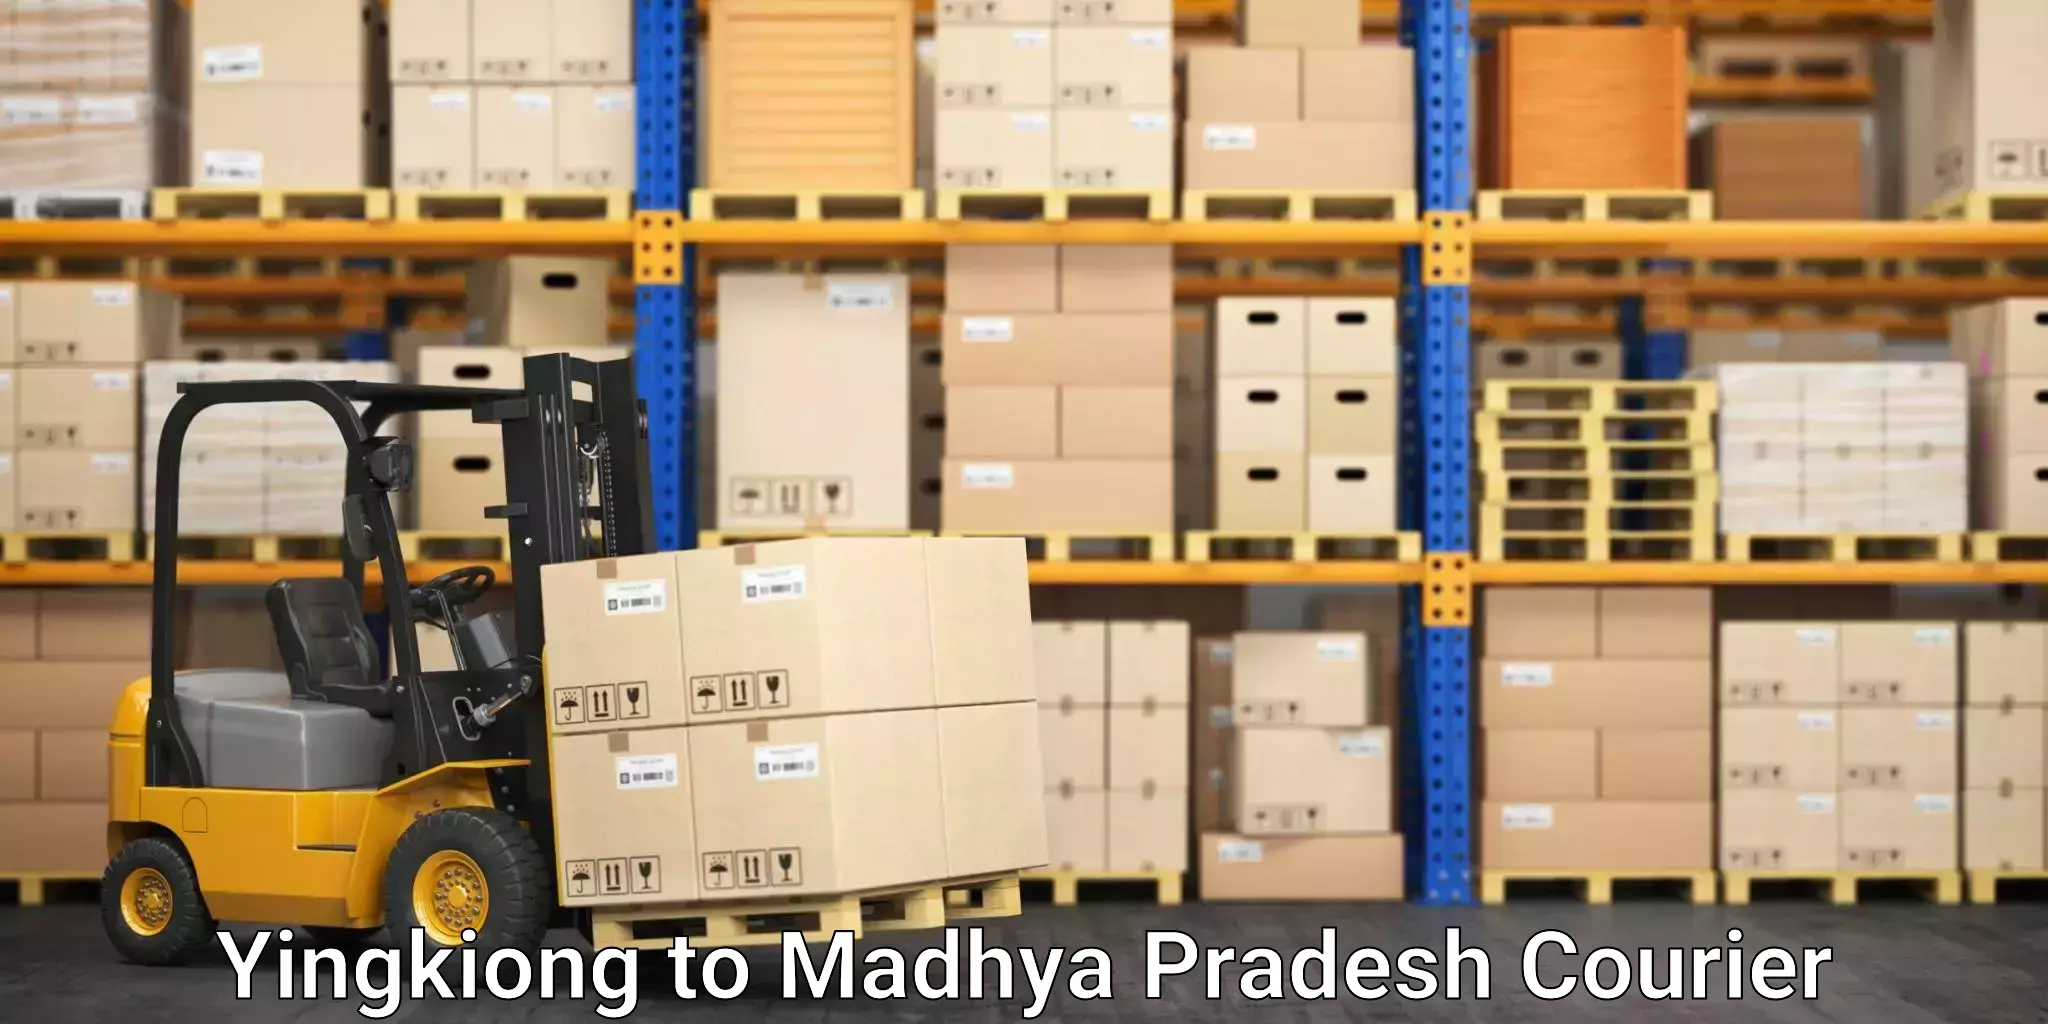 Specialized courier services in Yingkiong to Madhya Pradesh